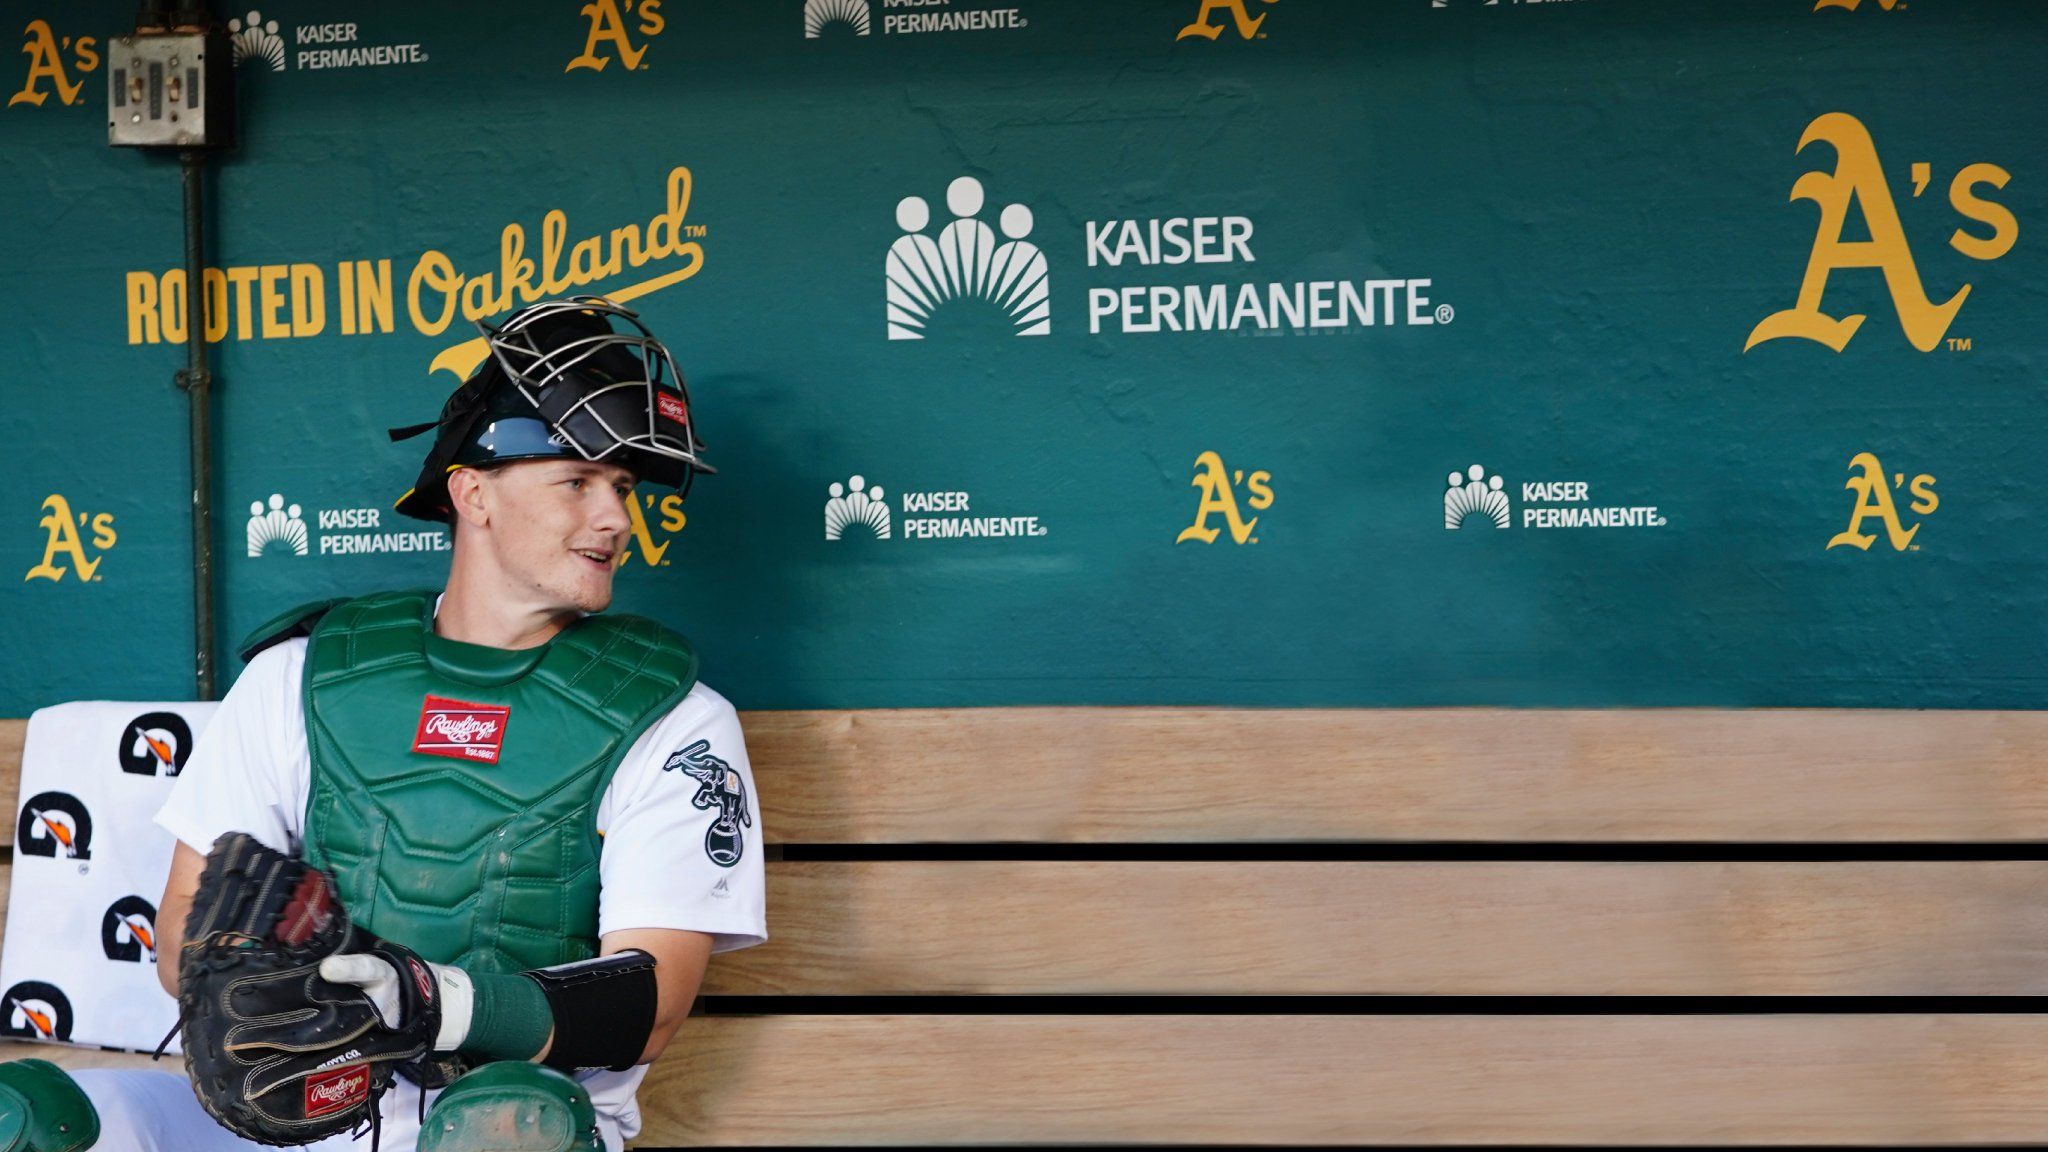 Oakland A's points to whoever uses these background and wears eyeblack during their next video conference call